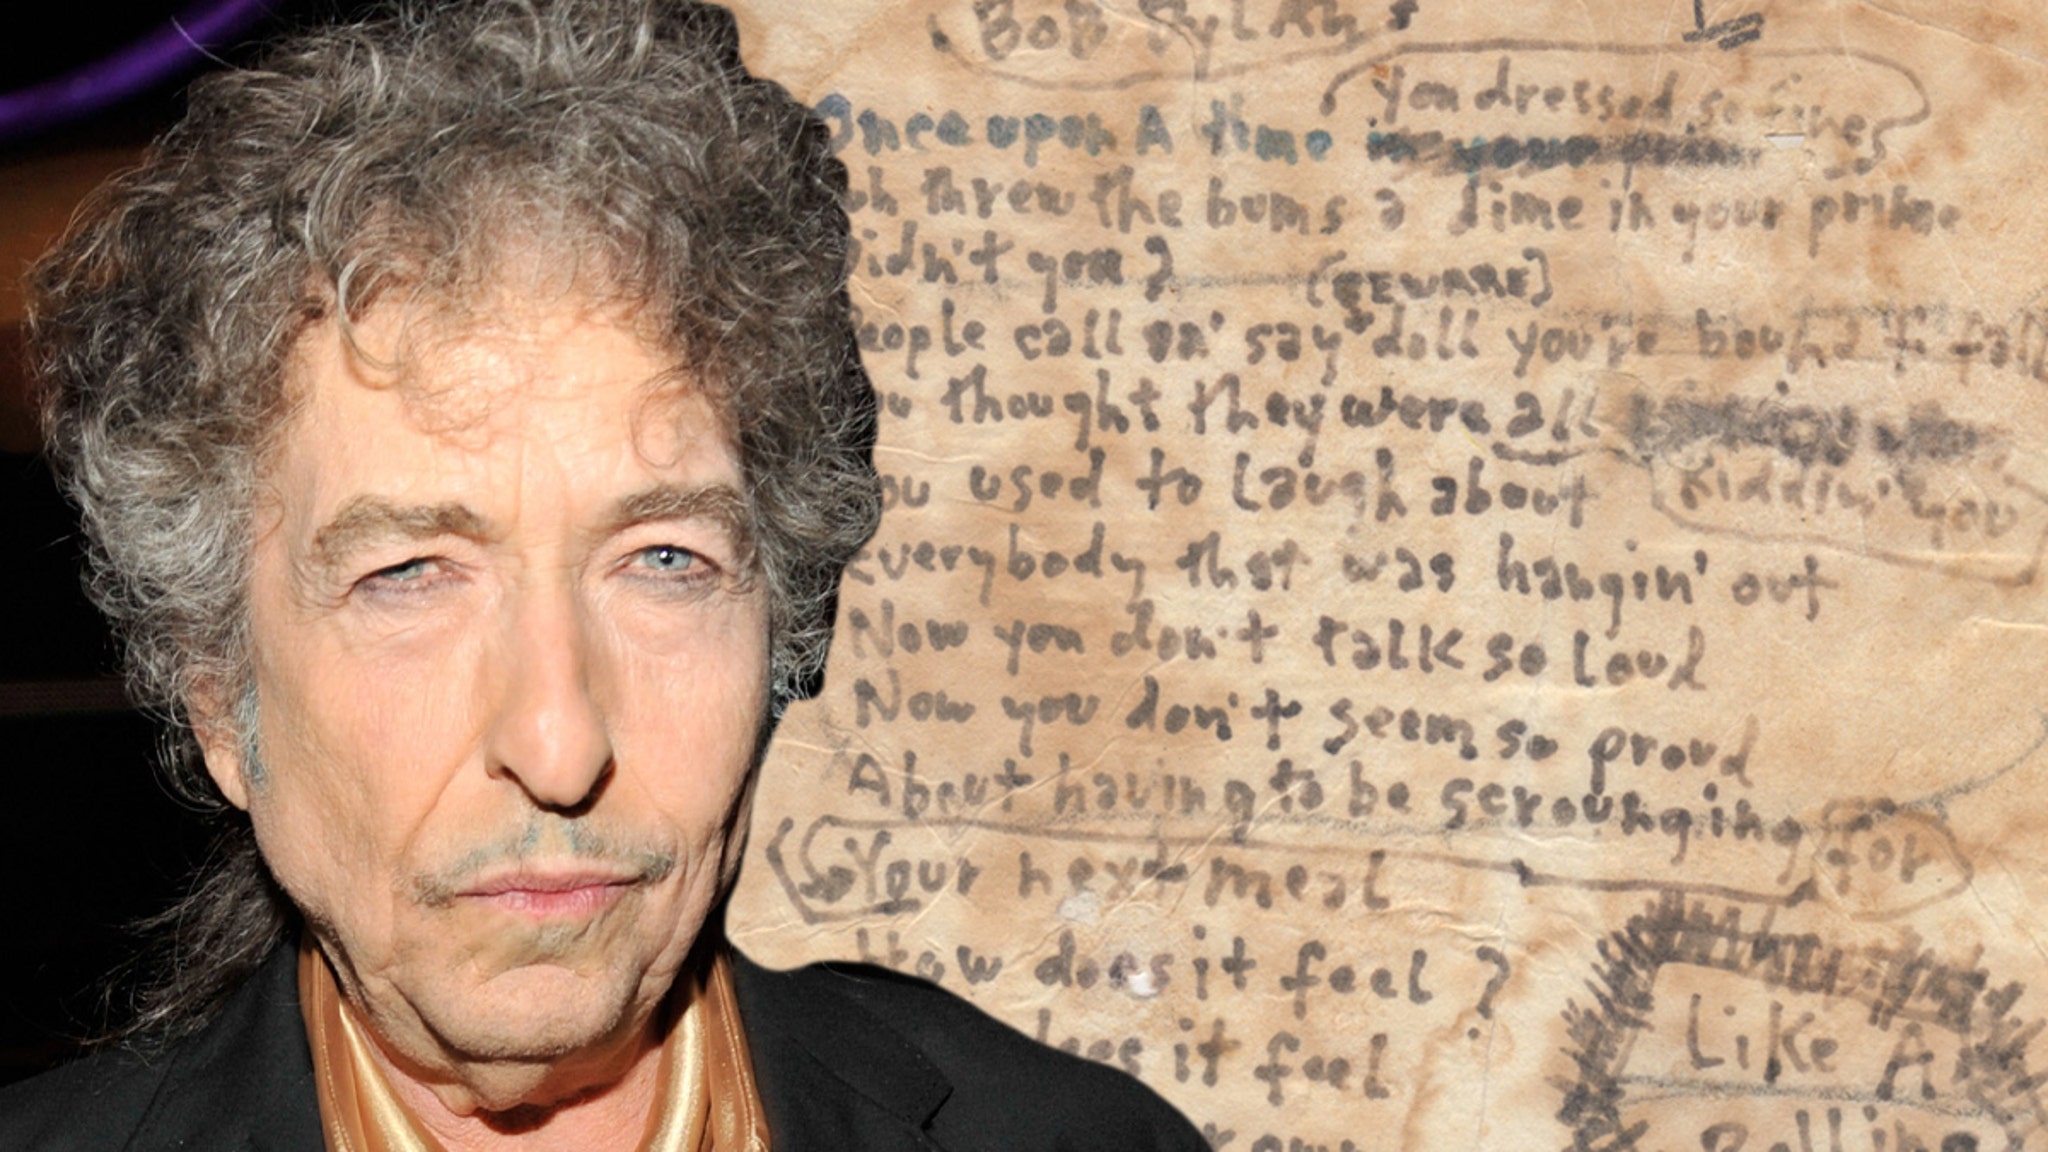 Bob Dylan Lyric Sheets For 'Rolling Stone' and 'Tambourine Man' Up For Sale thumbnail